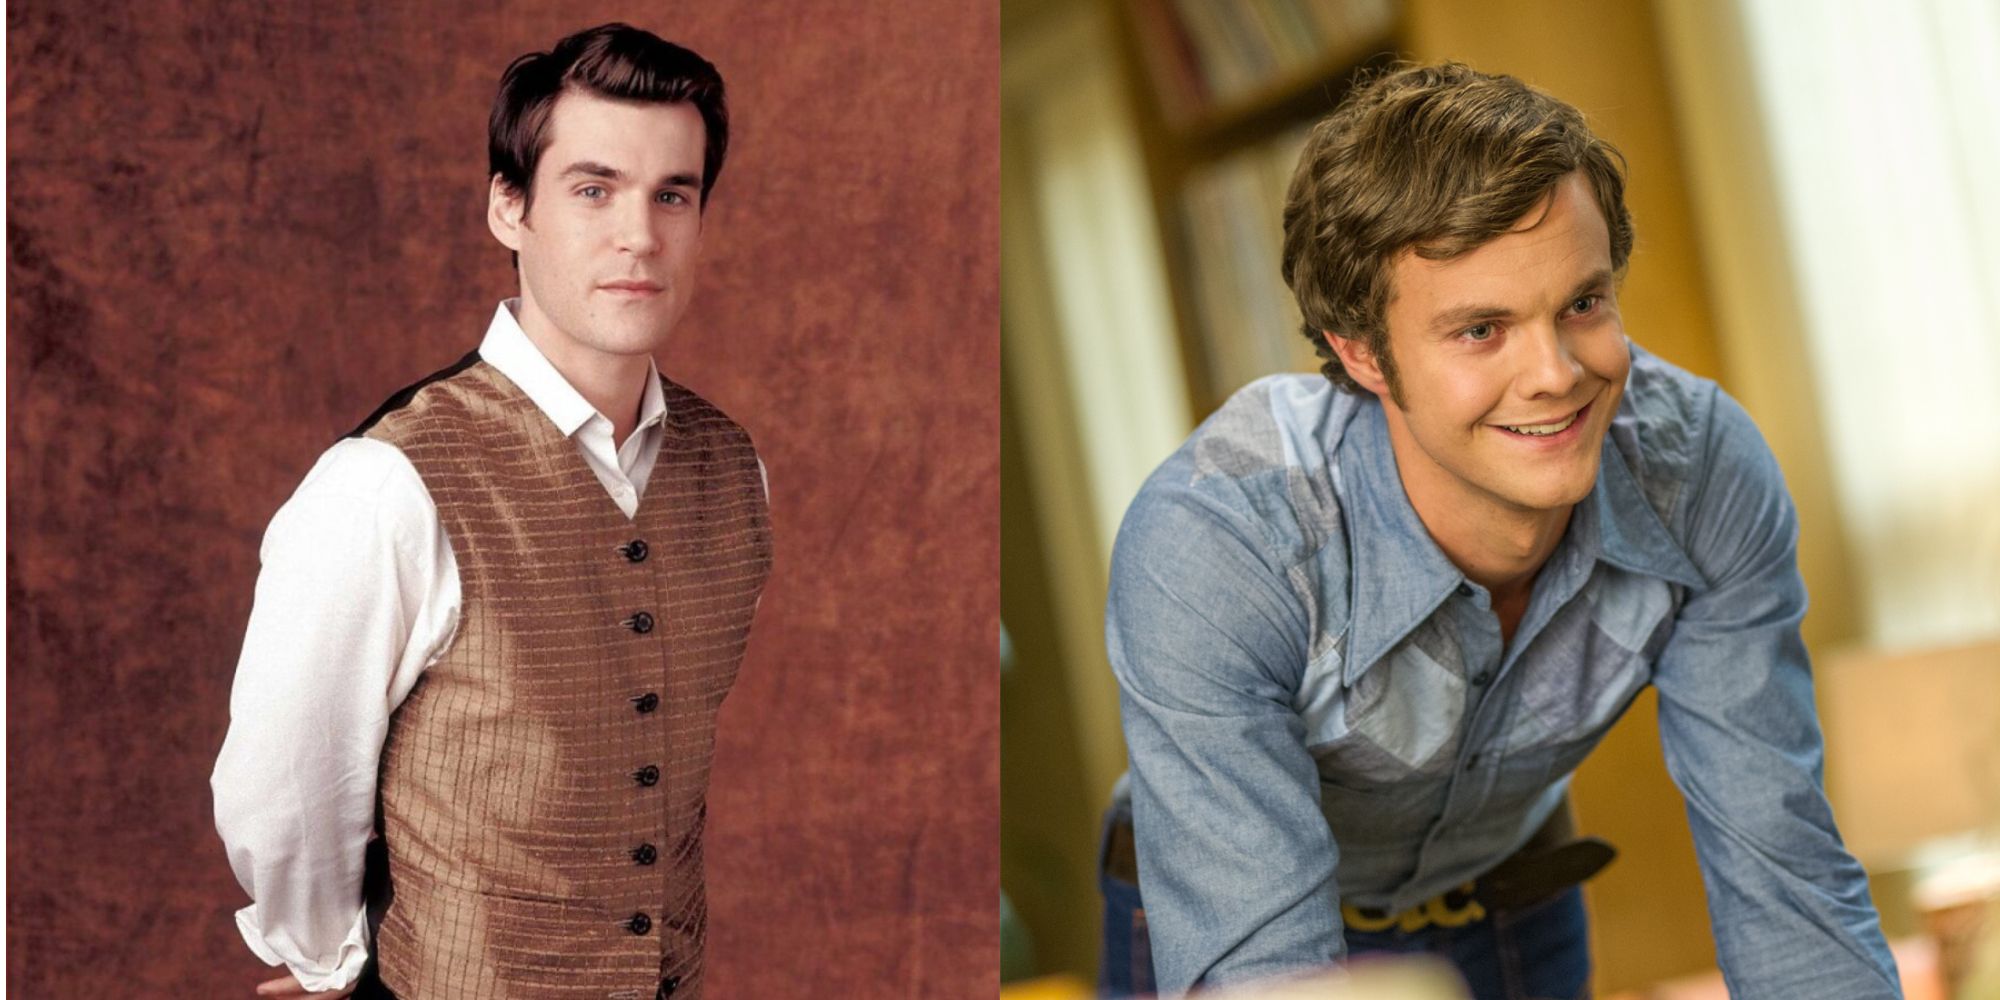 Simon Tam on the left, Jack Quaid leaning on a table in the right image